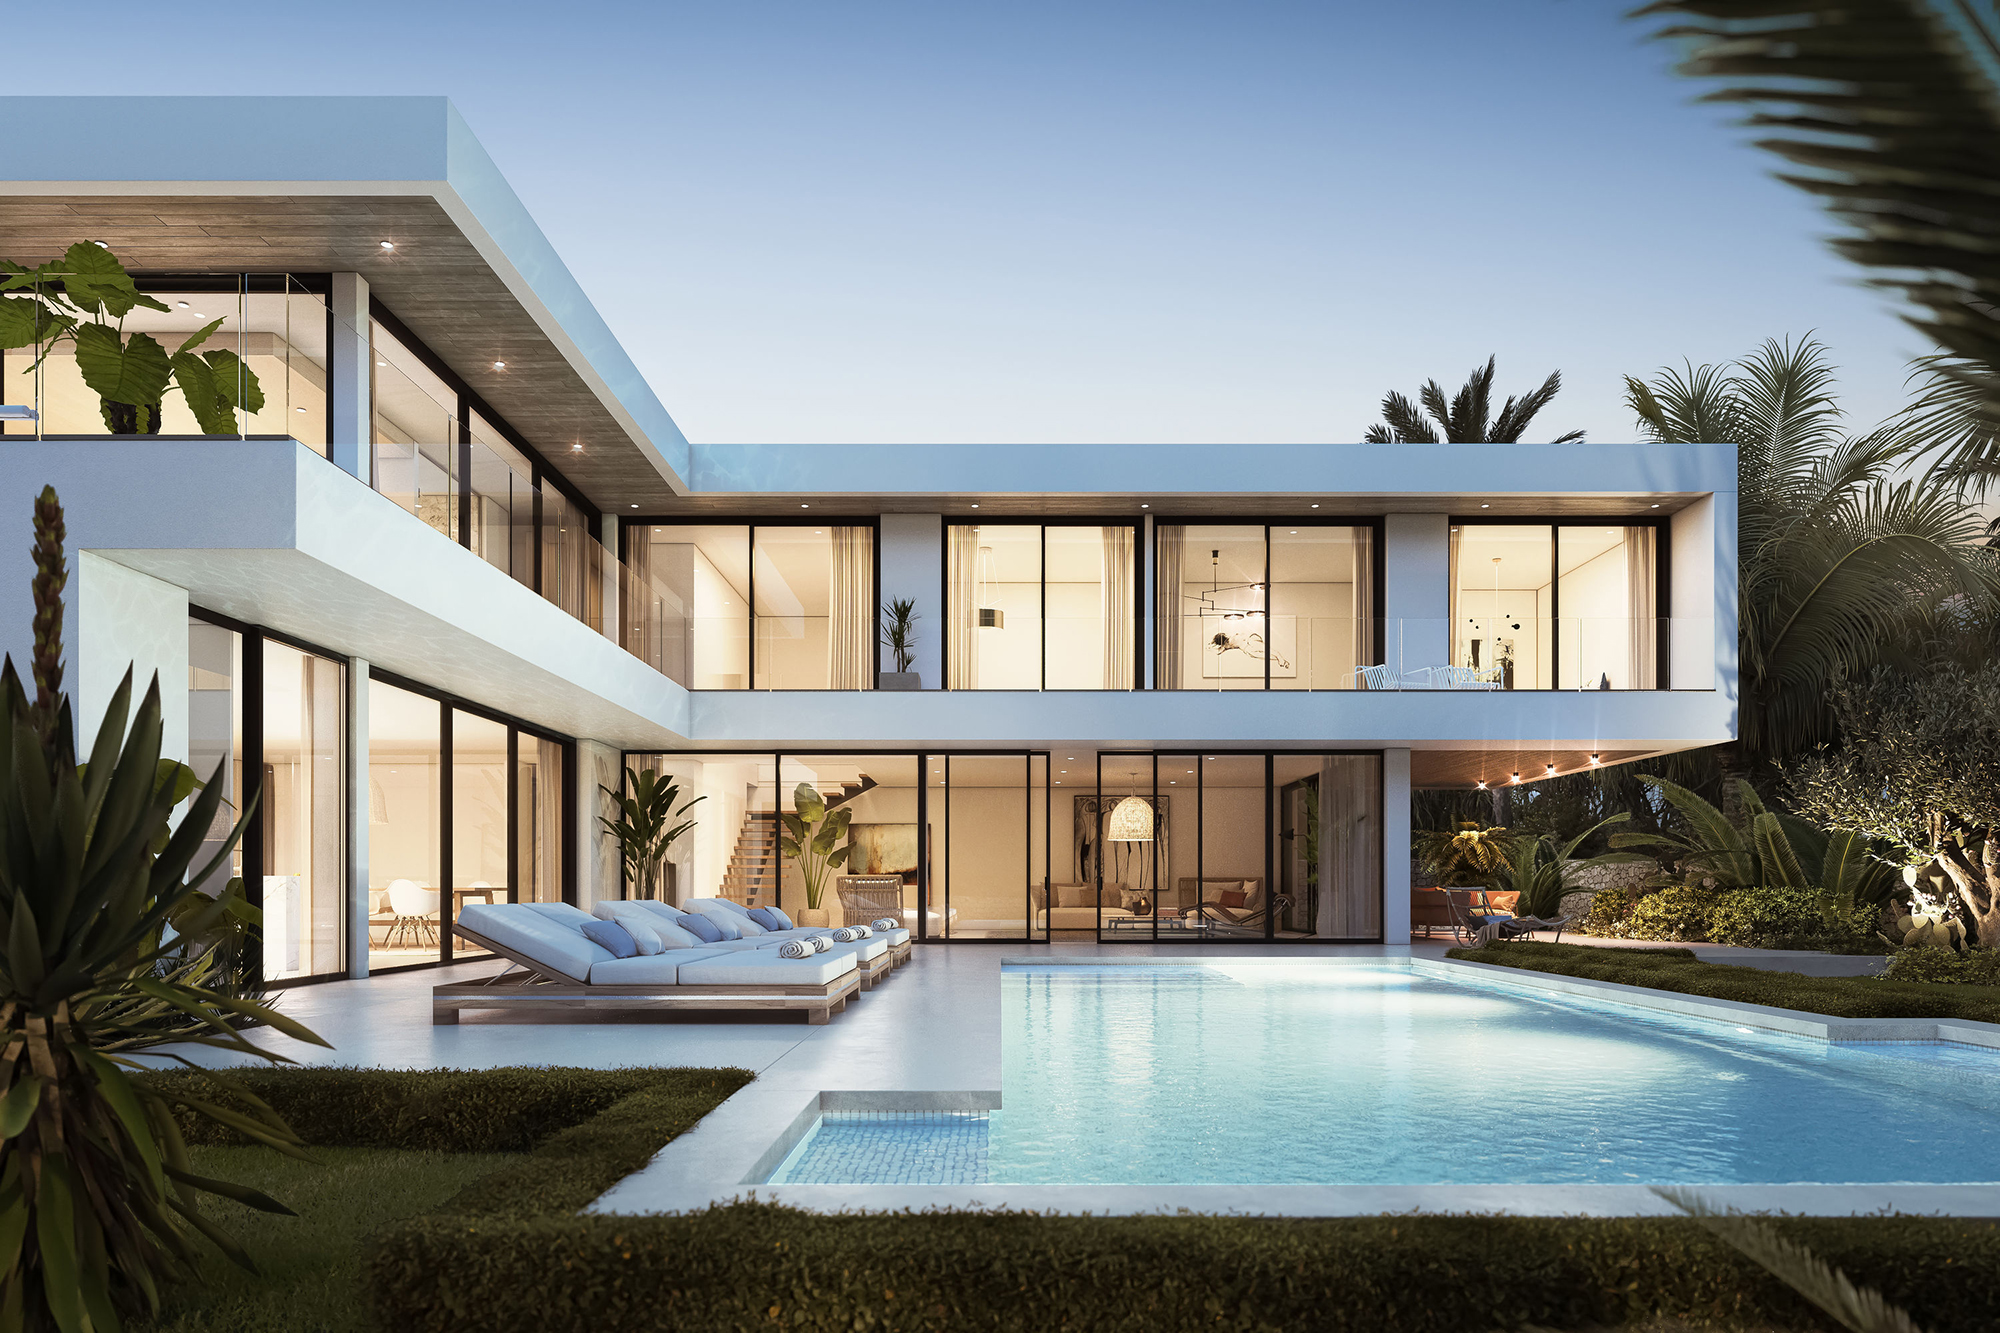 Render of an L-shaped luxury villa in Ibiza, wrapped around swimming pool